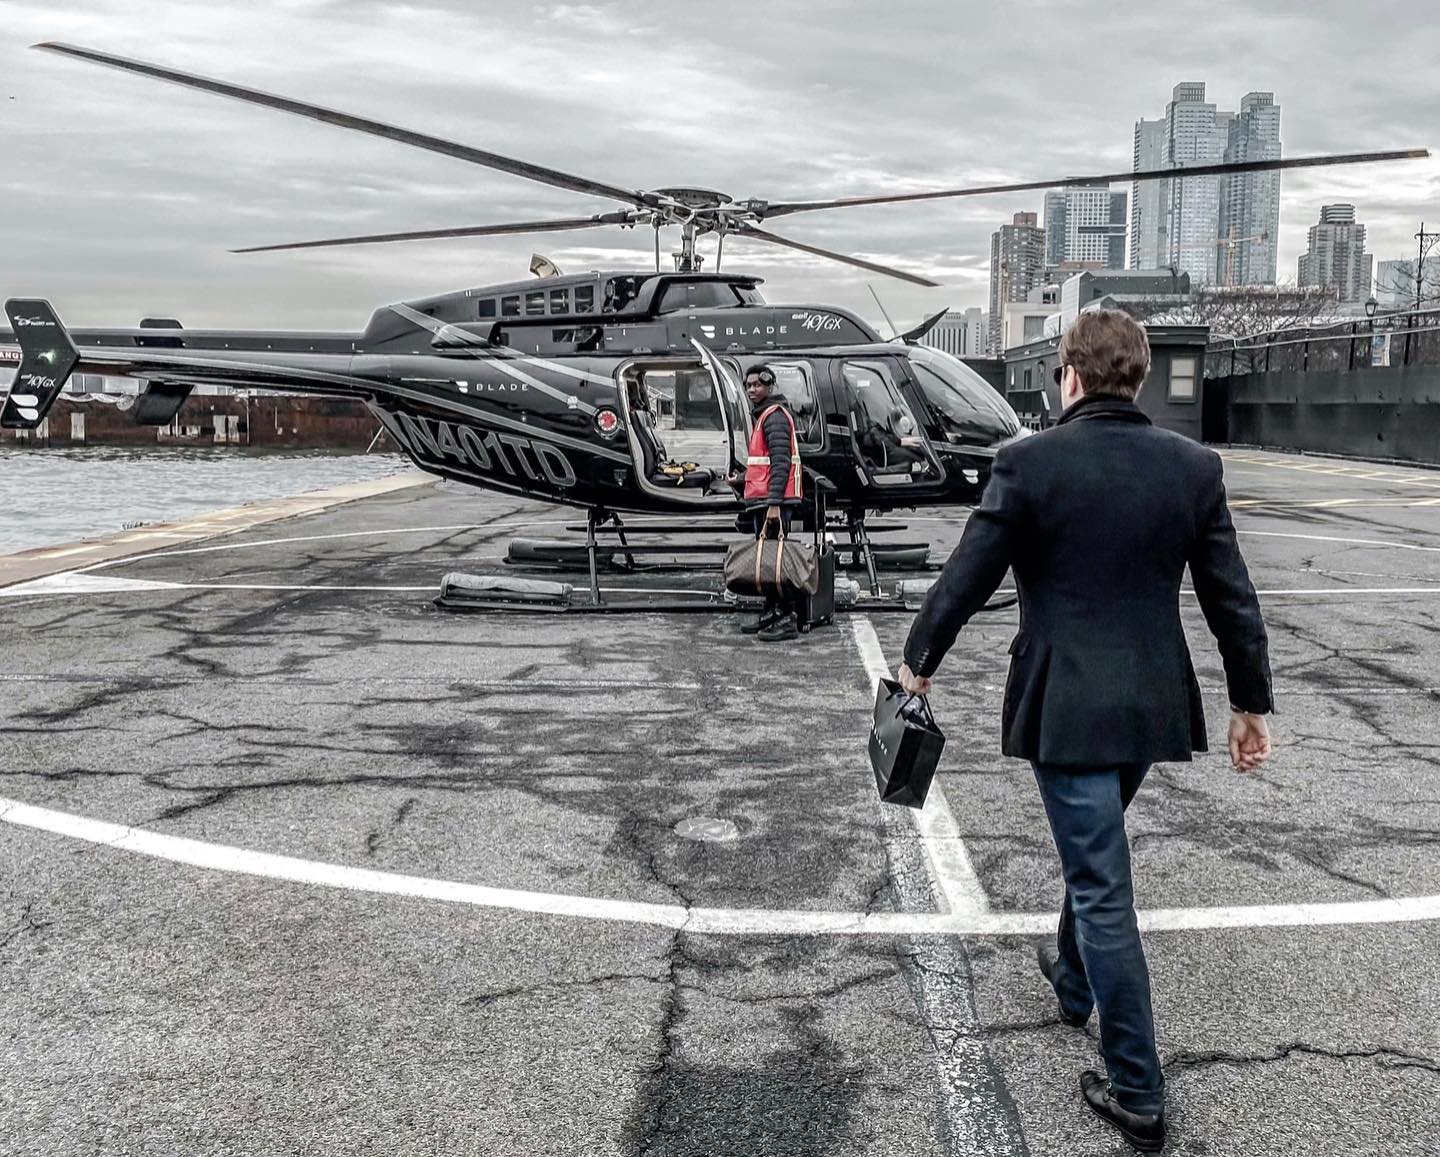 Bilt Rewards & BLADE: Score Free Helicopter Rides and Lounge Perks with Luxurious New Partnership